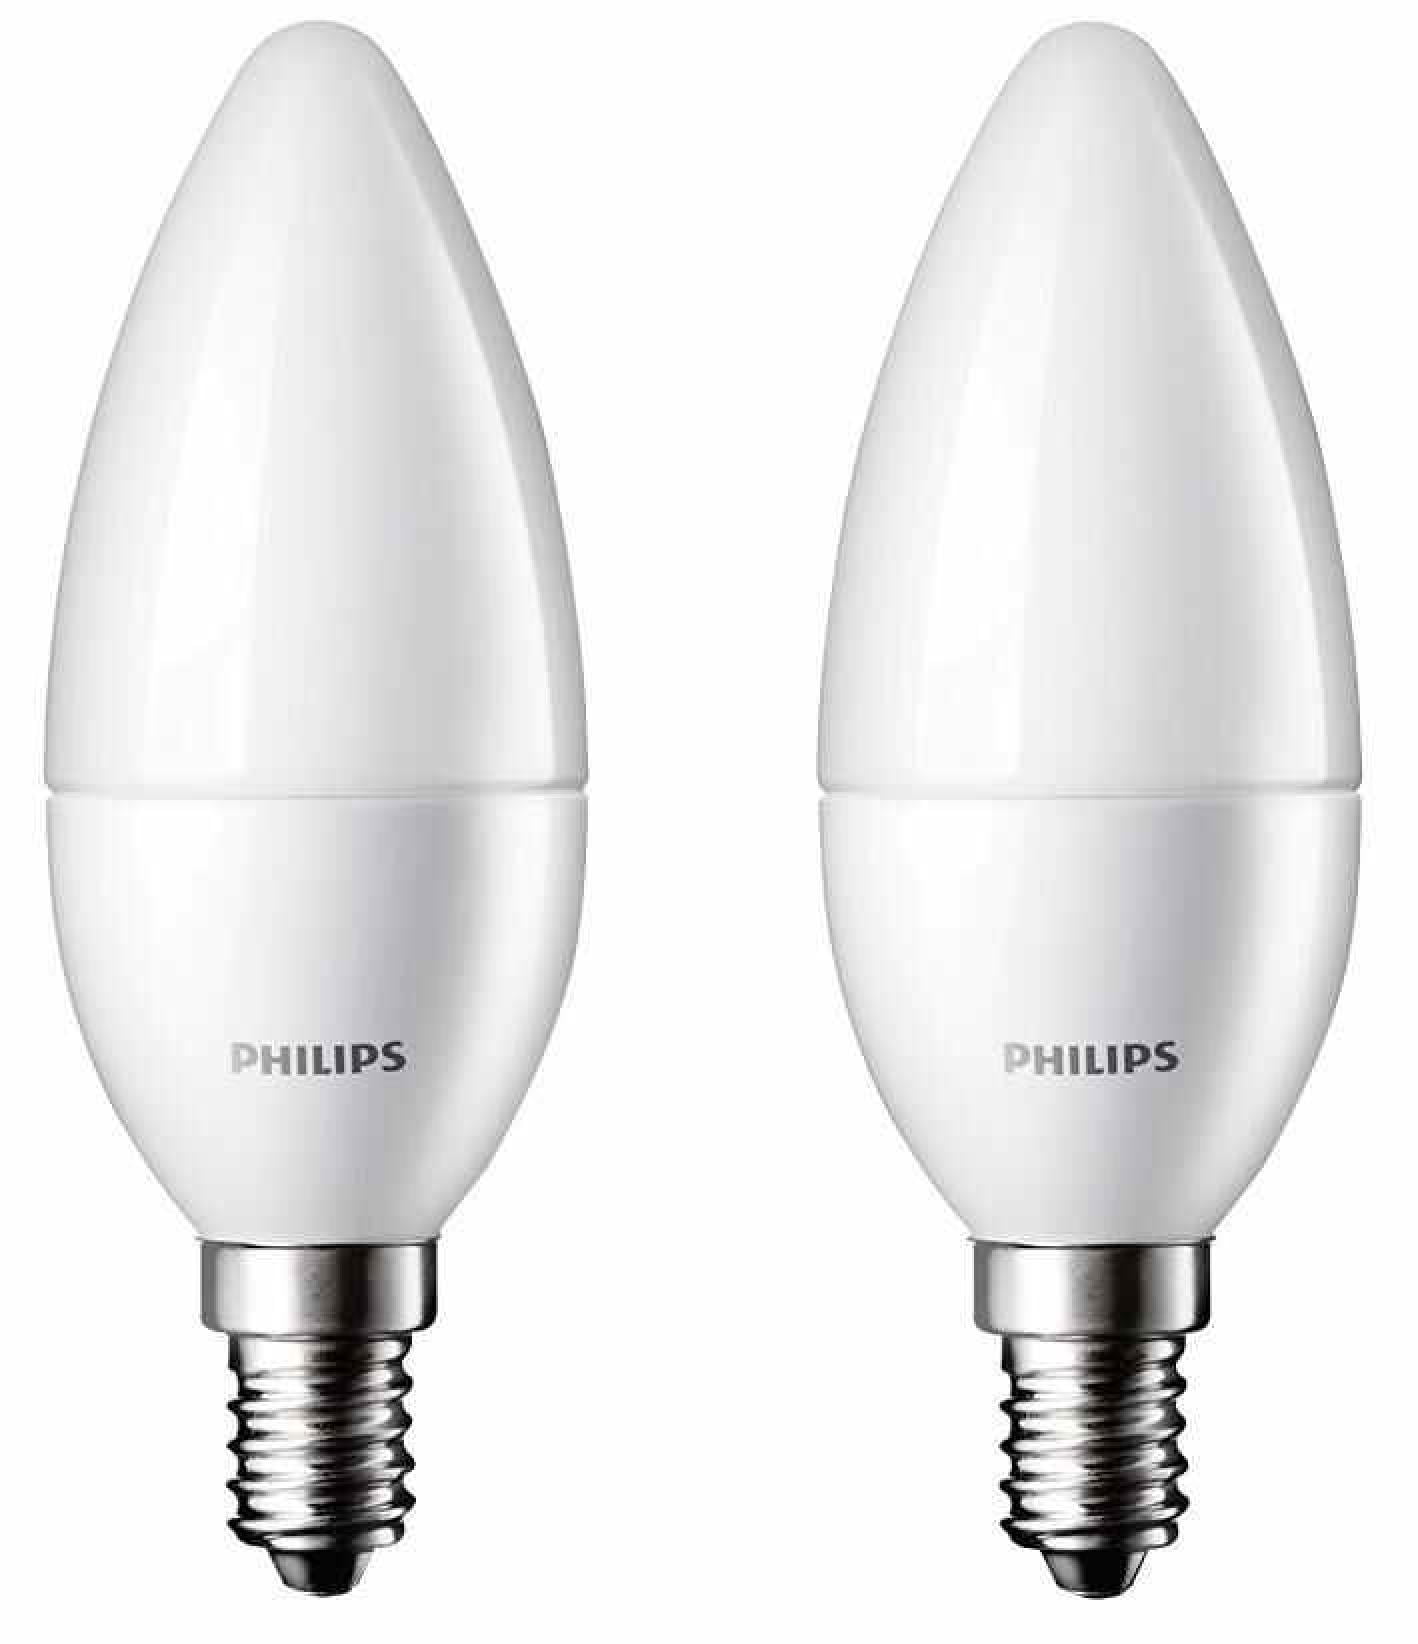 PHILIPS LIGHTING LED Candle Twin Pack, 3W 250lm Warm White - Walmart.com